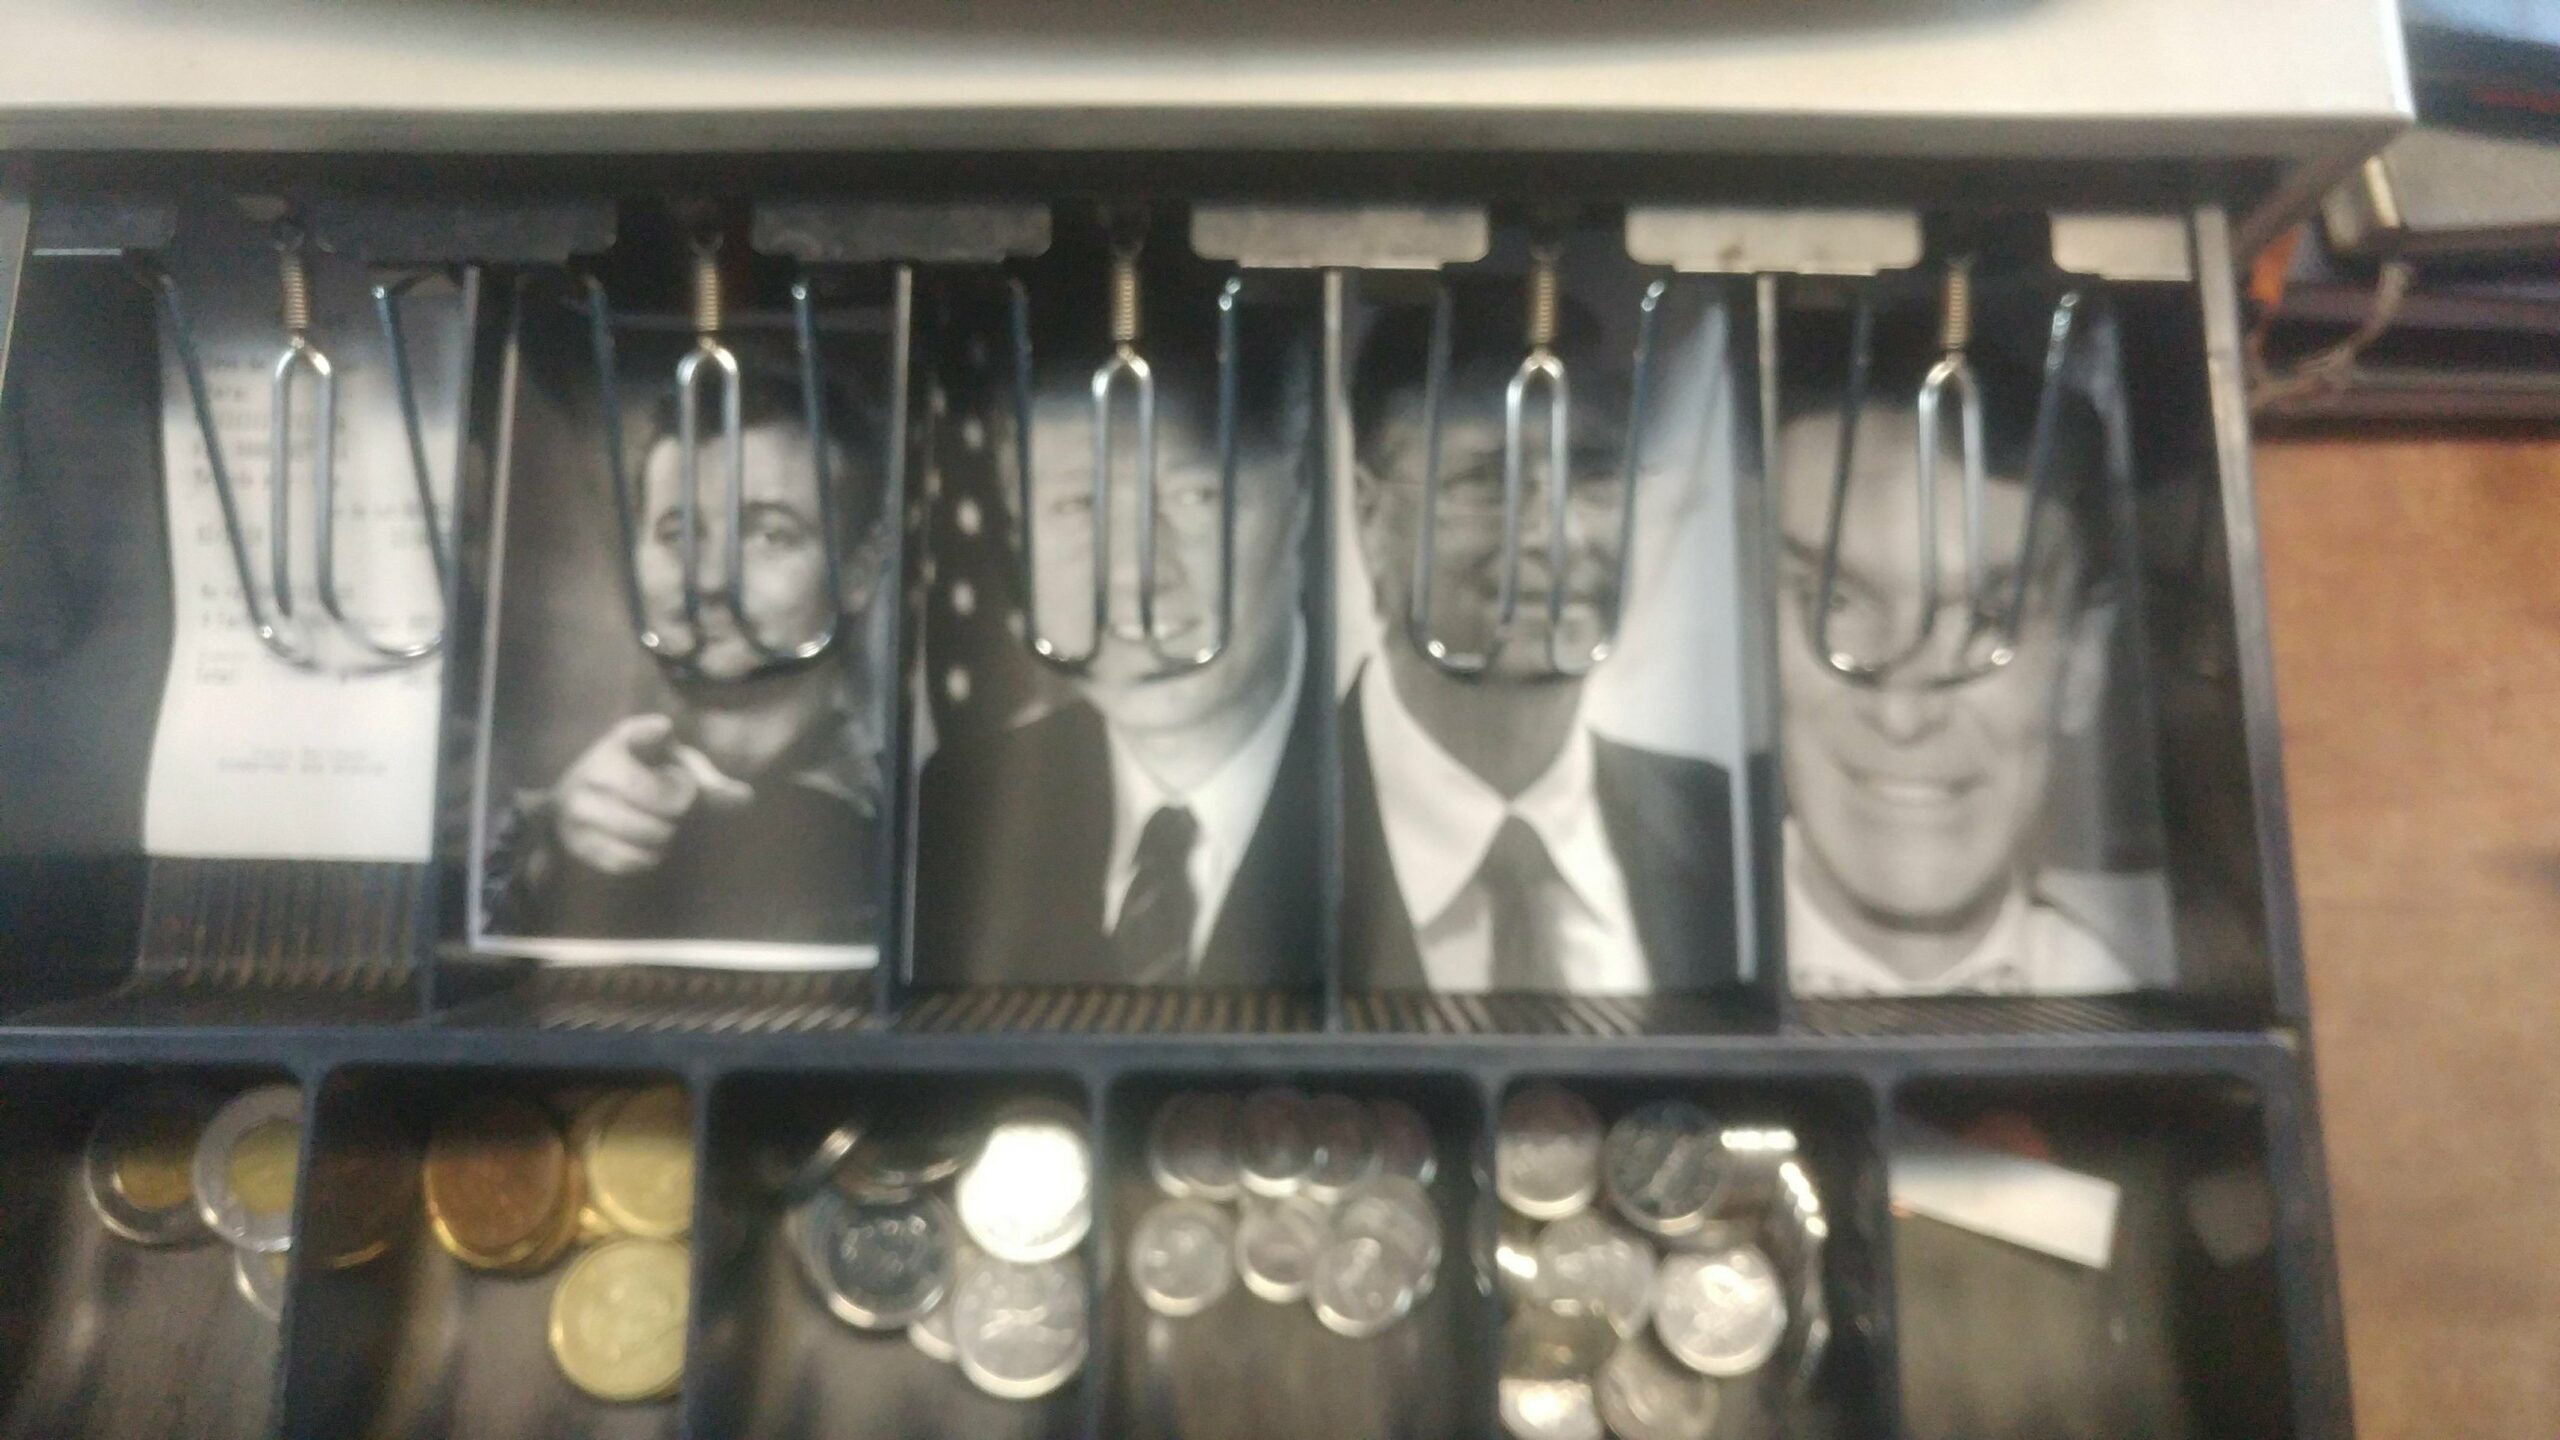 pictures of famous men named bill in a cashier's drawer